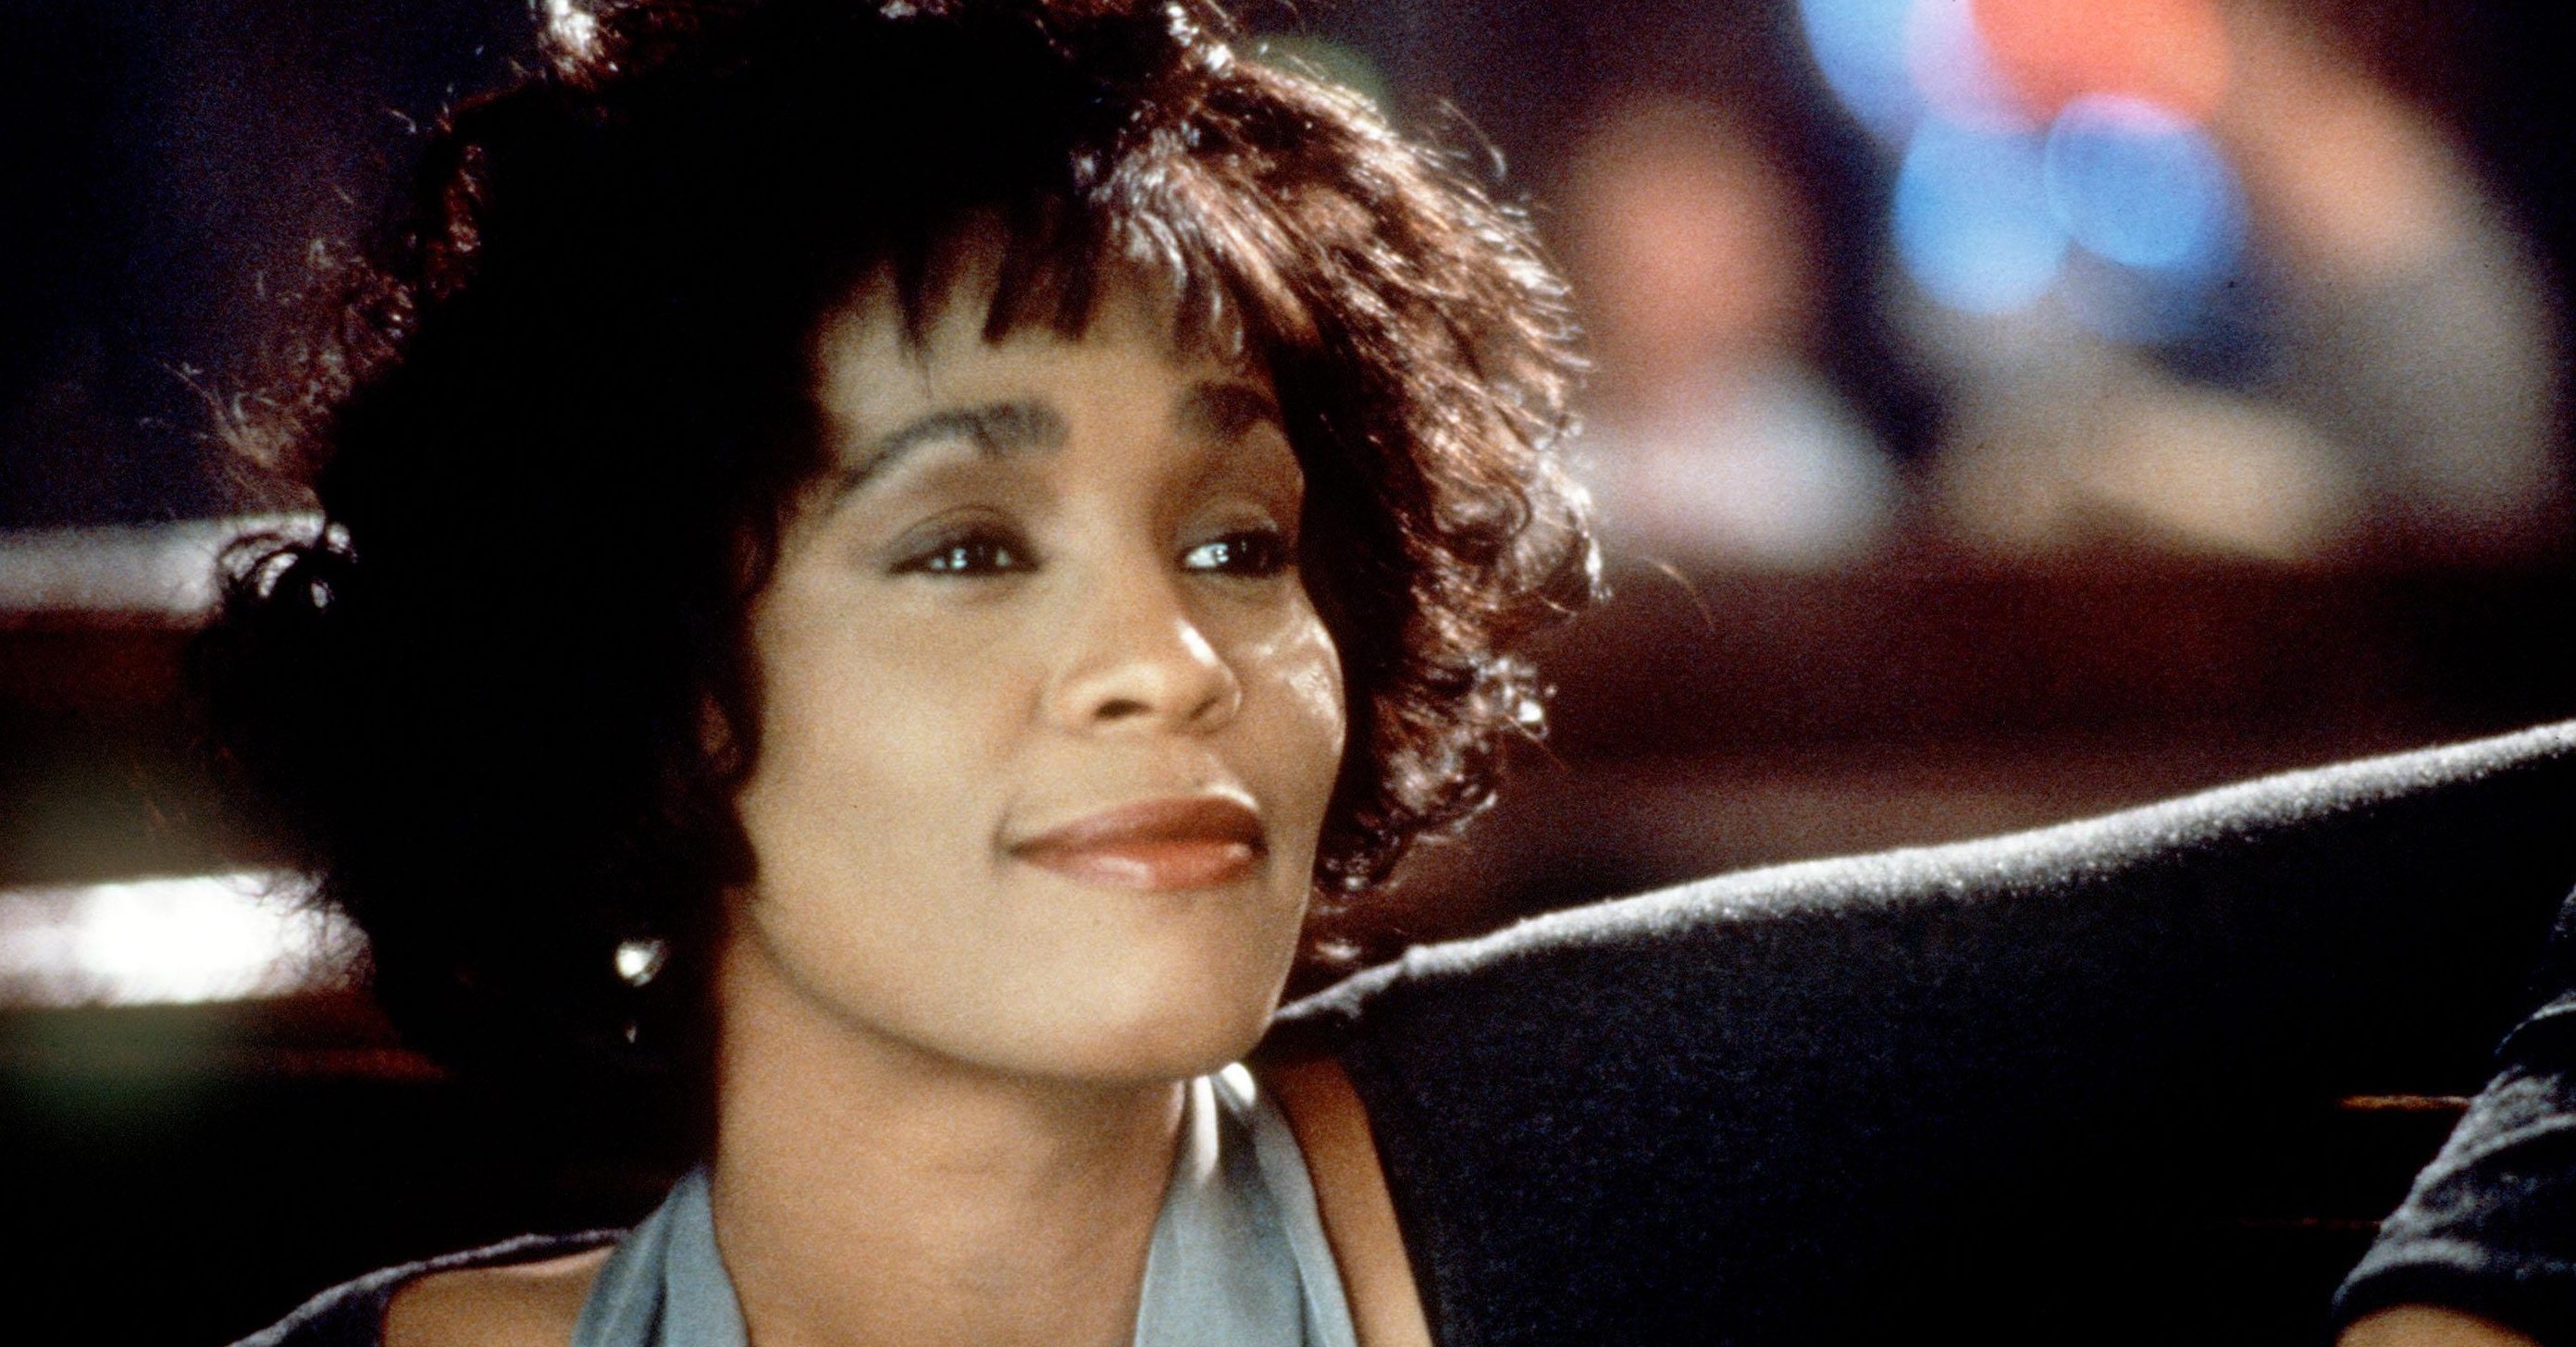 Whitney Houston’s The Bodyguard To Re-release On Theaters To Mark Film’s 30th Anniversary